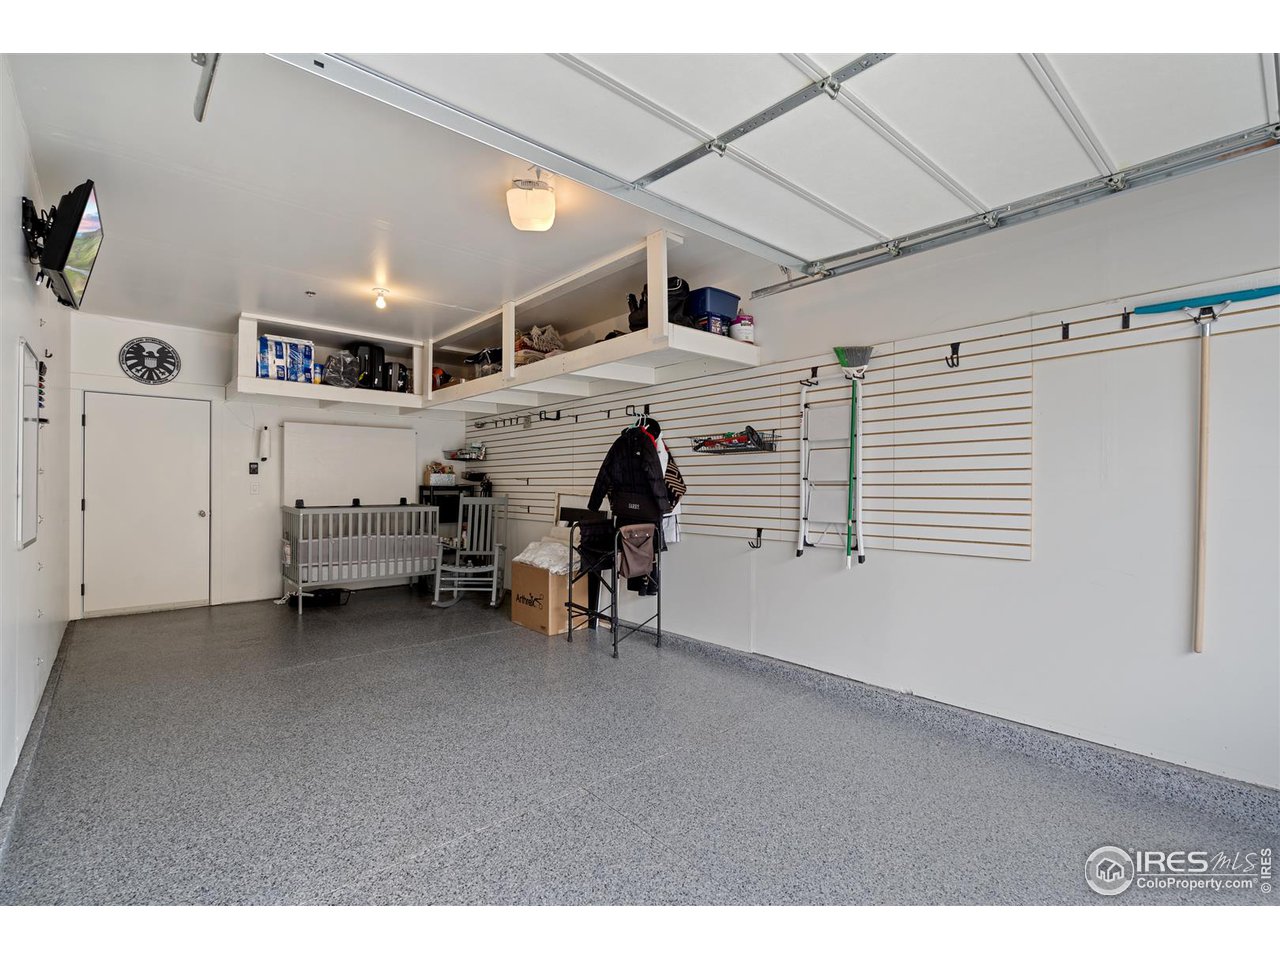 Oversized garage with epoxy floors, wall-mounted TV (included), racks and rail system